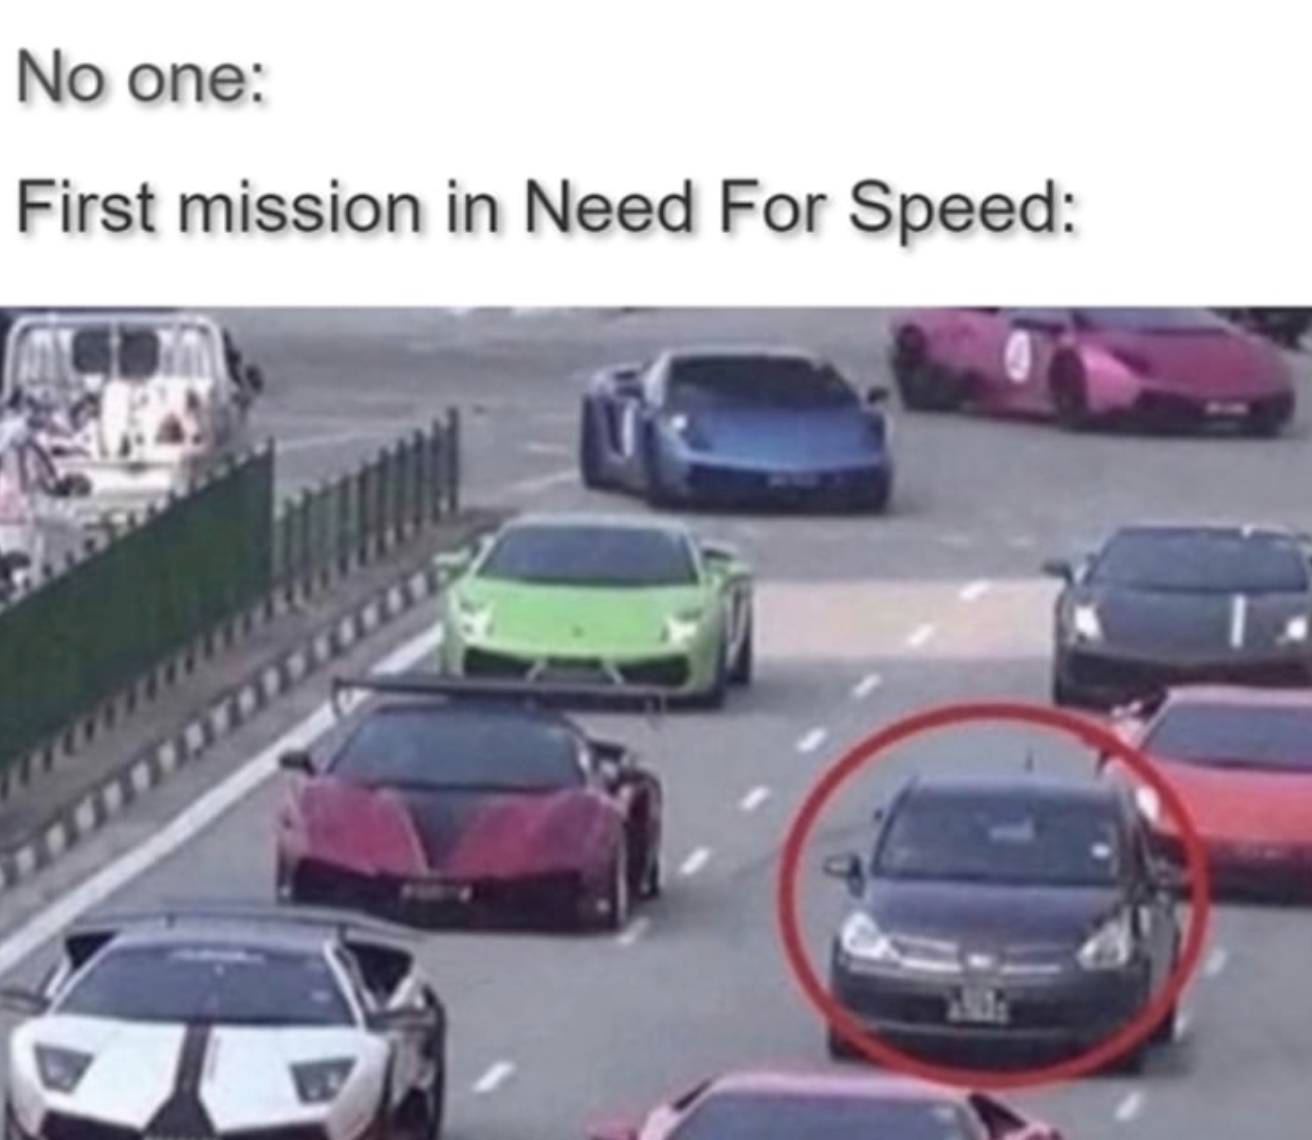 funny gaming memes - first mission in nfs meme - No one First mission in Need For Speed